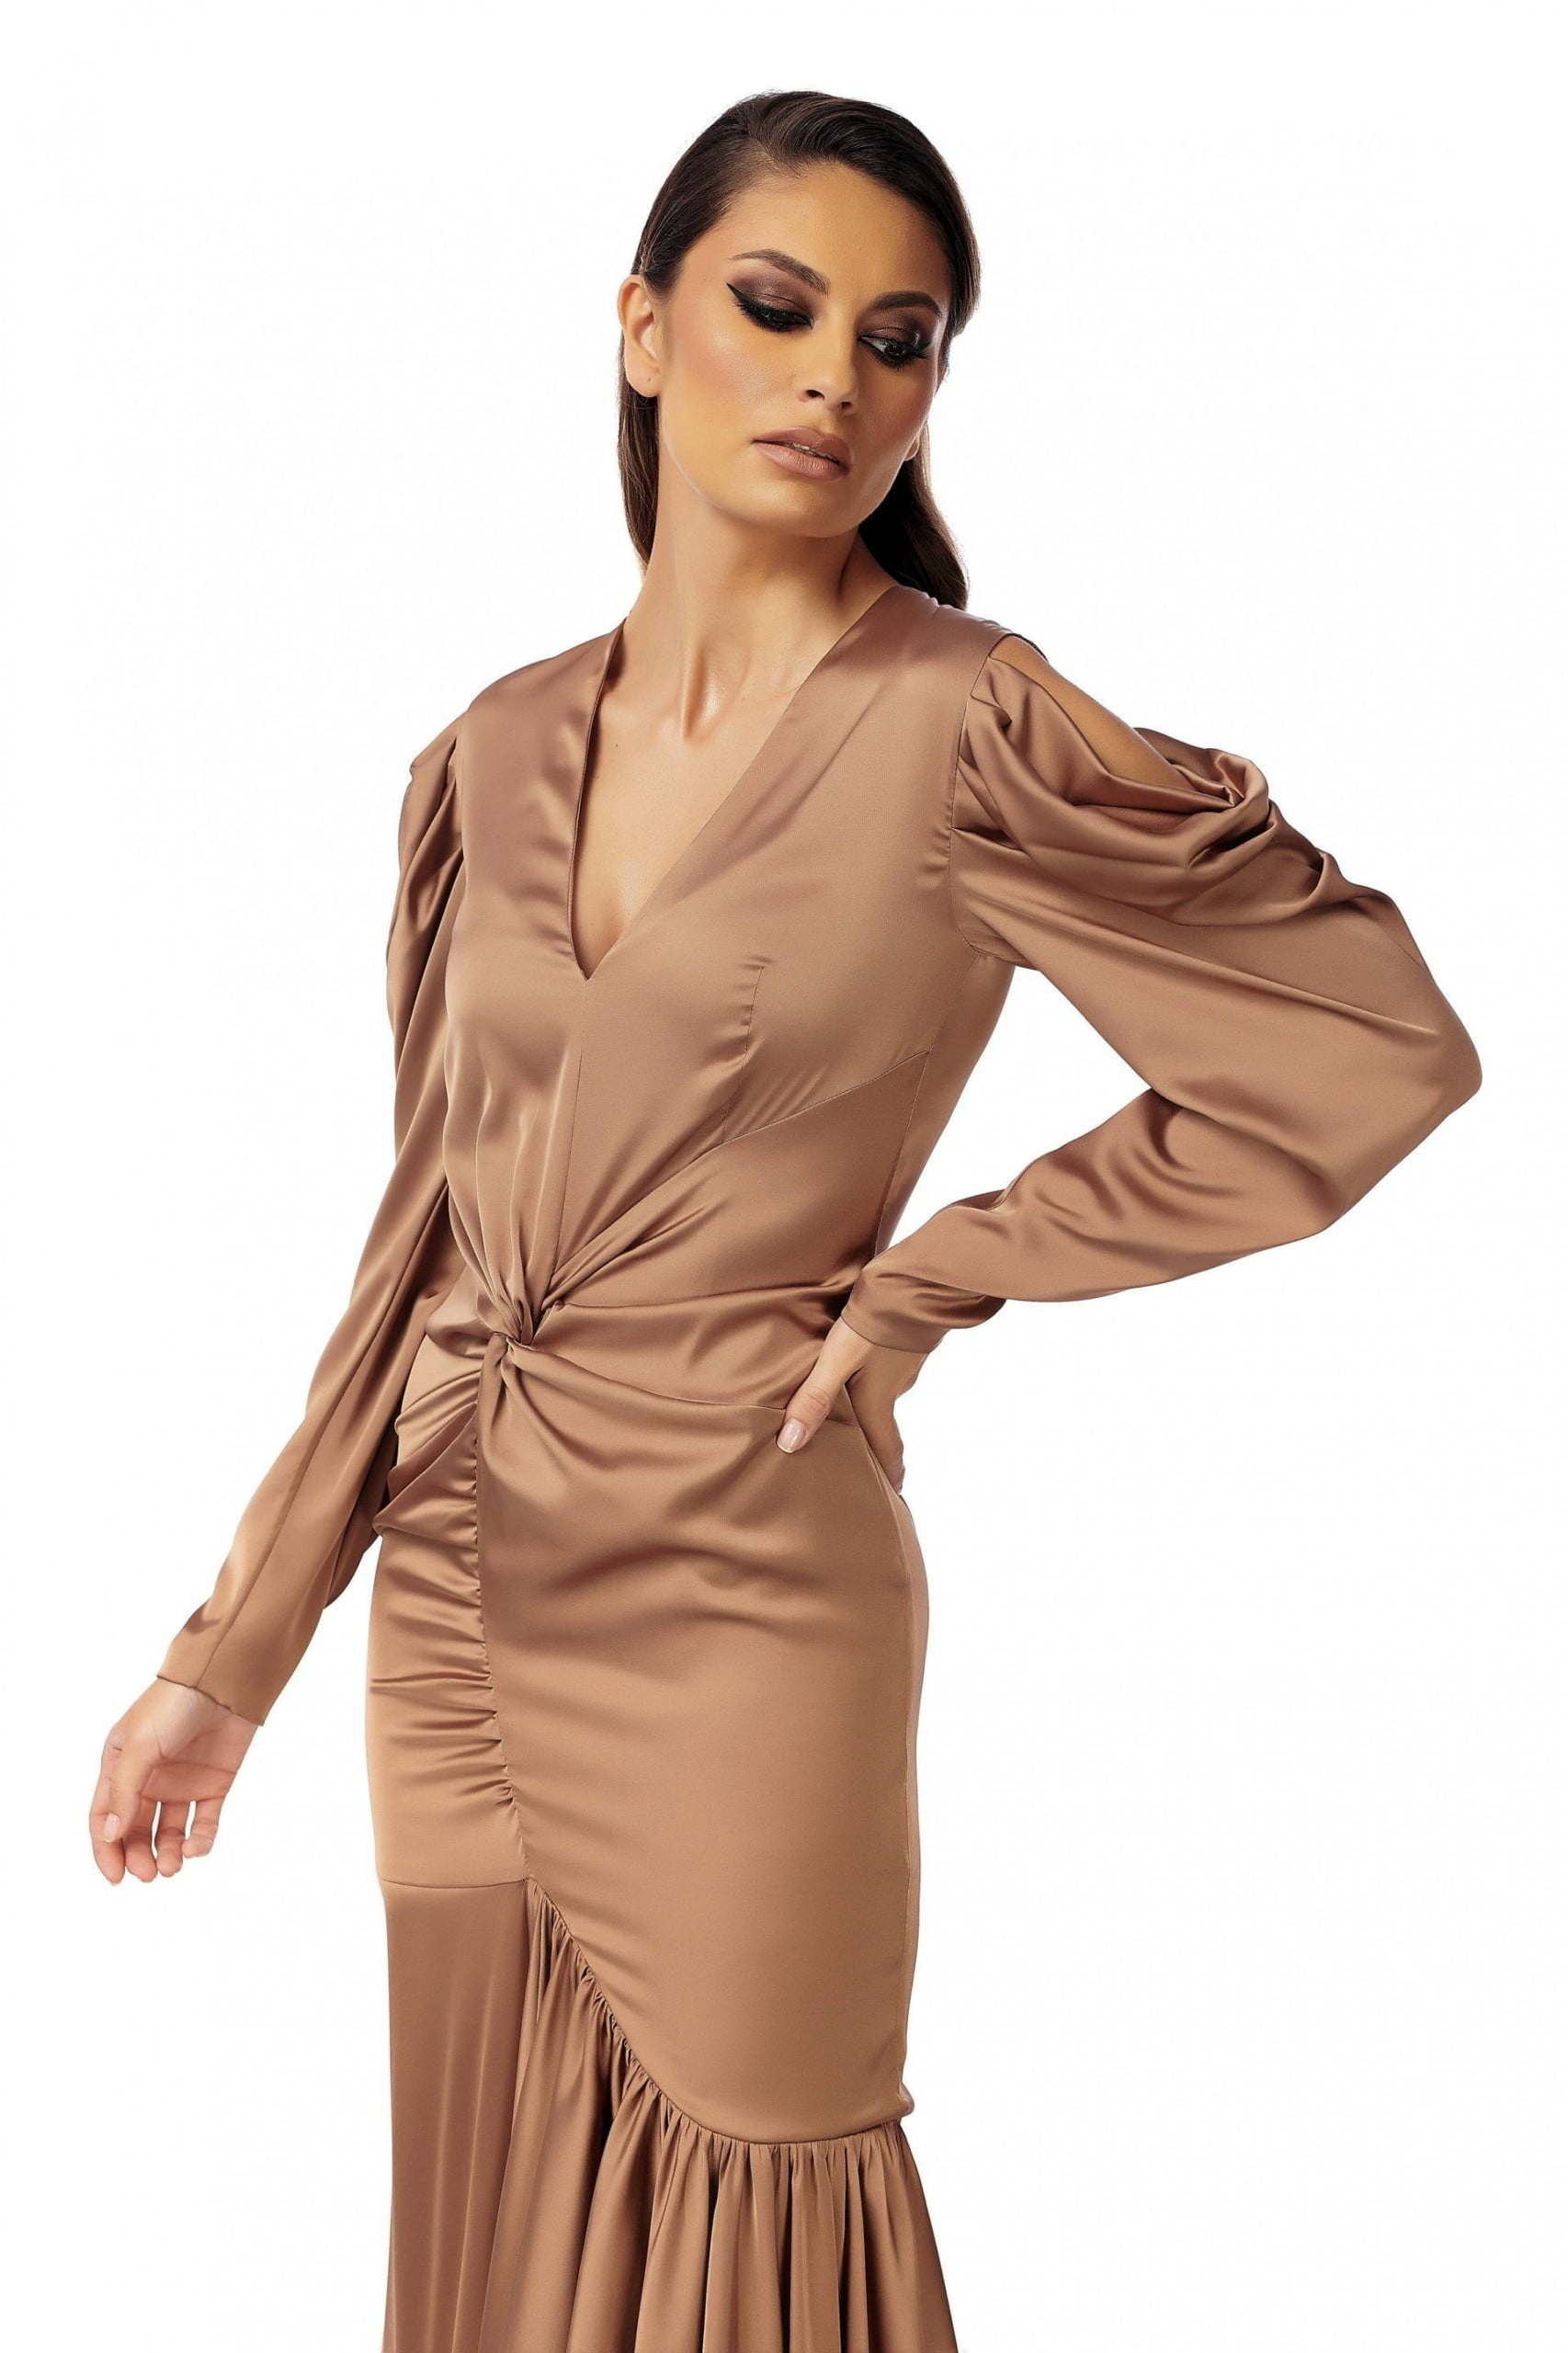 Evening Bronze Dress with Long Sleeves ...